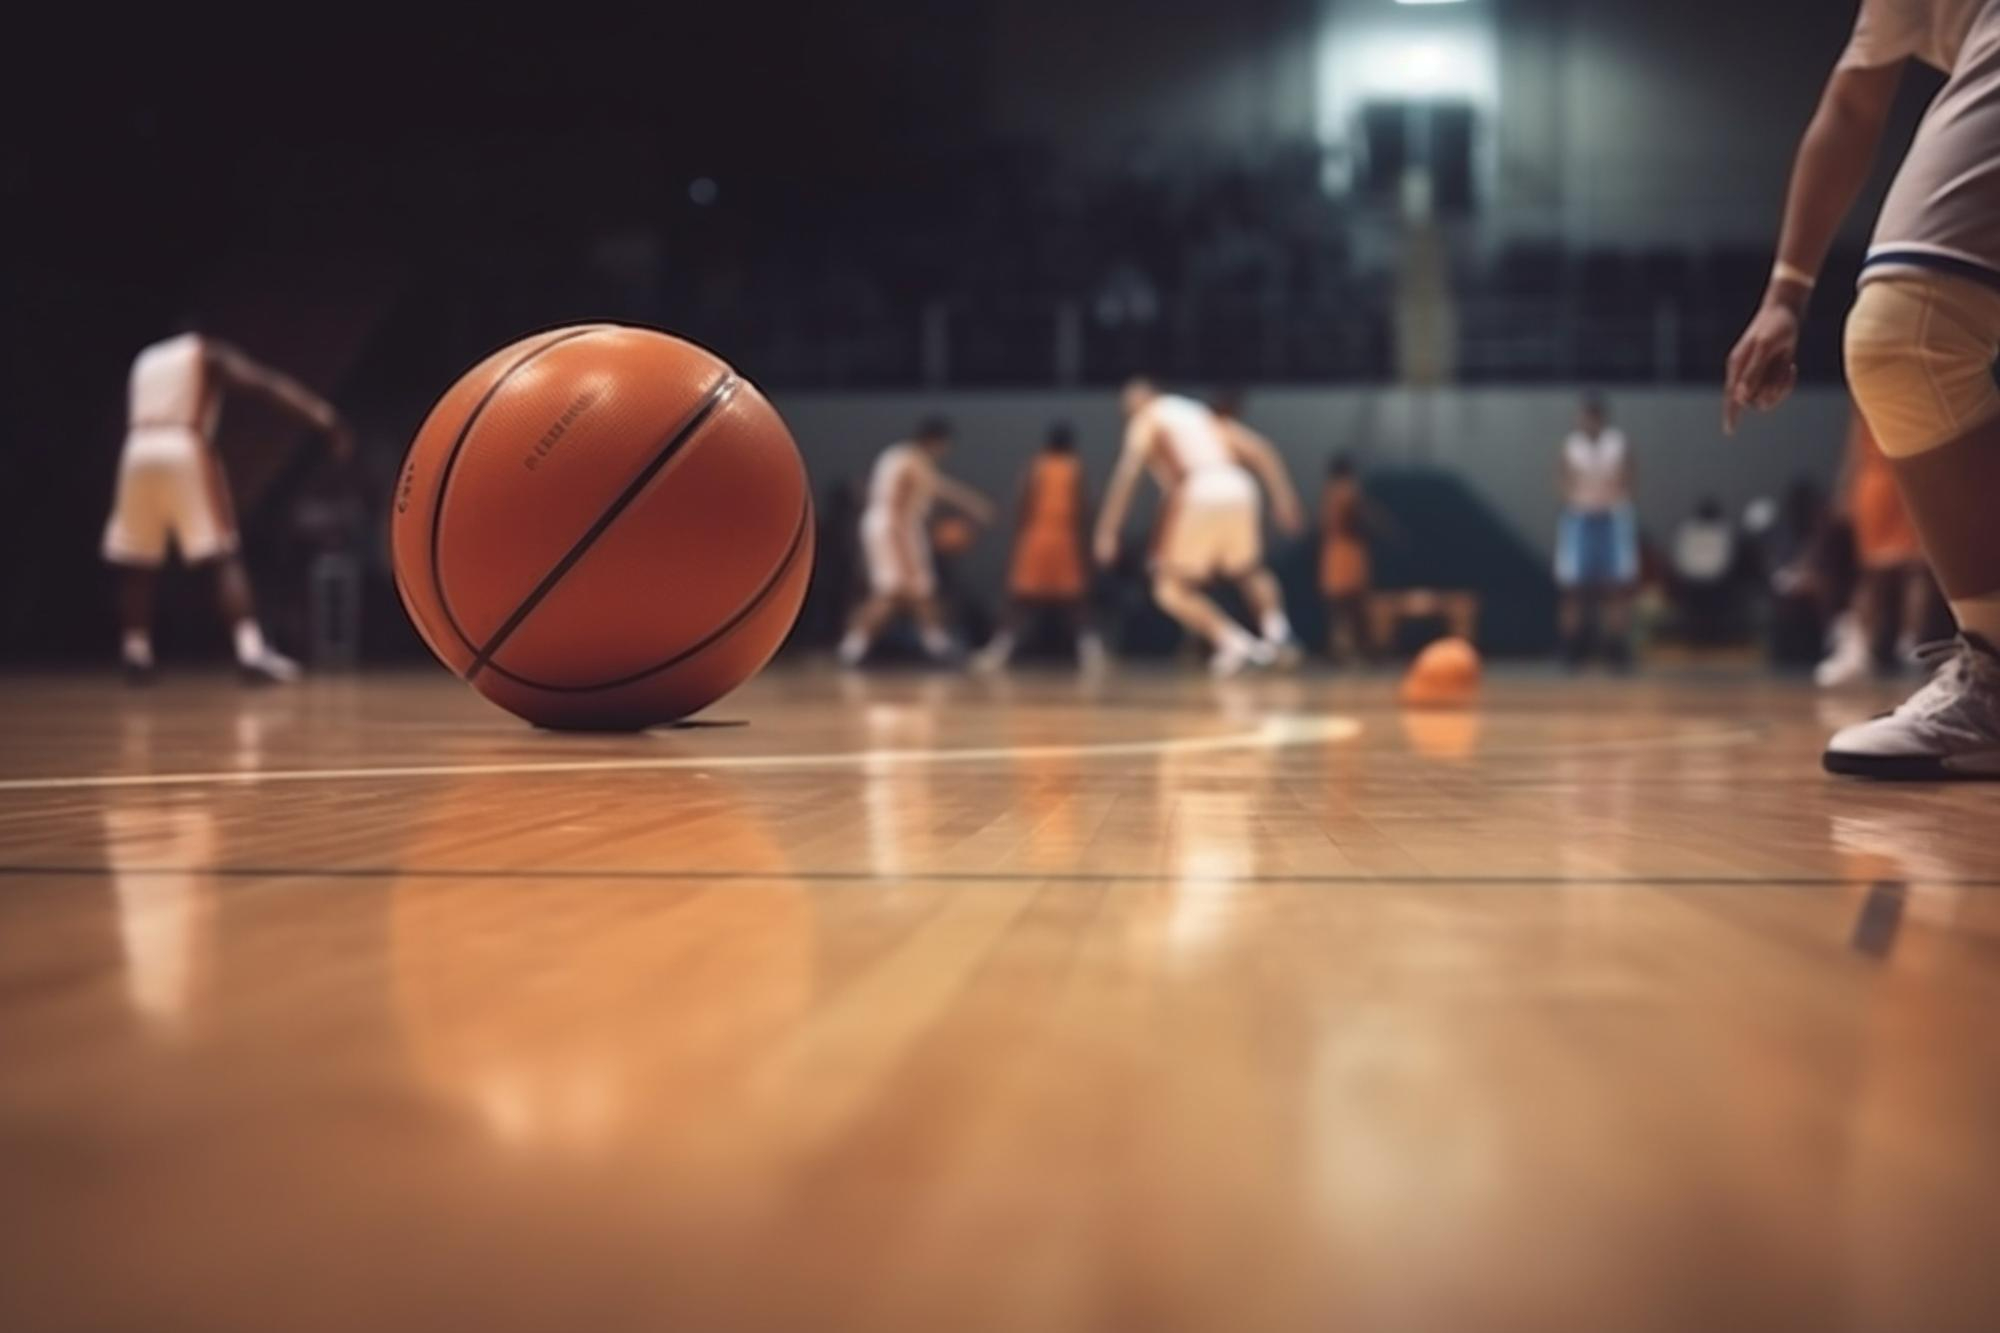 https://teamwinbasketball.com/wp-content/uploads/2023/07/basketball-training-game-background-basketball-wooden-court-floor-close-up-with-blurred-players.jpg